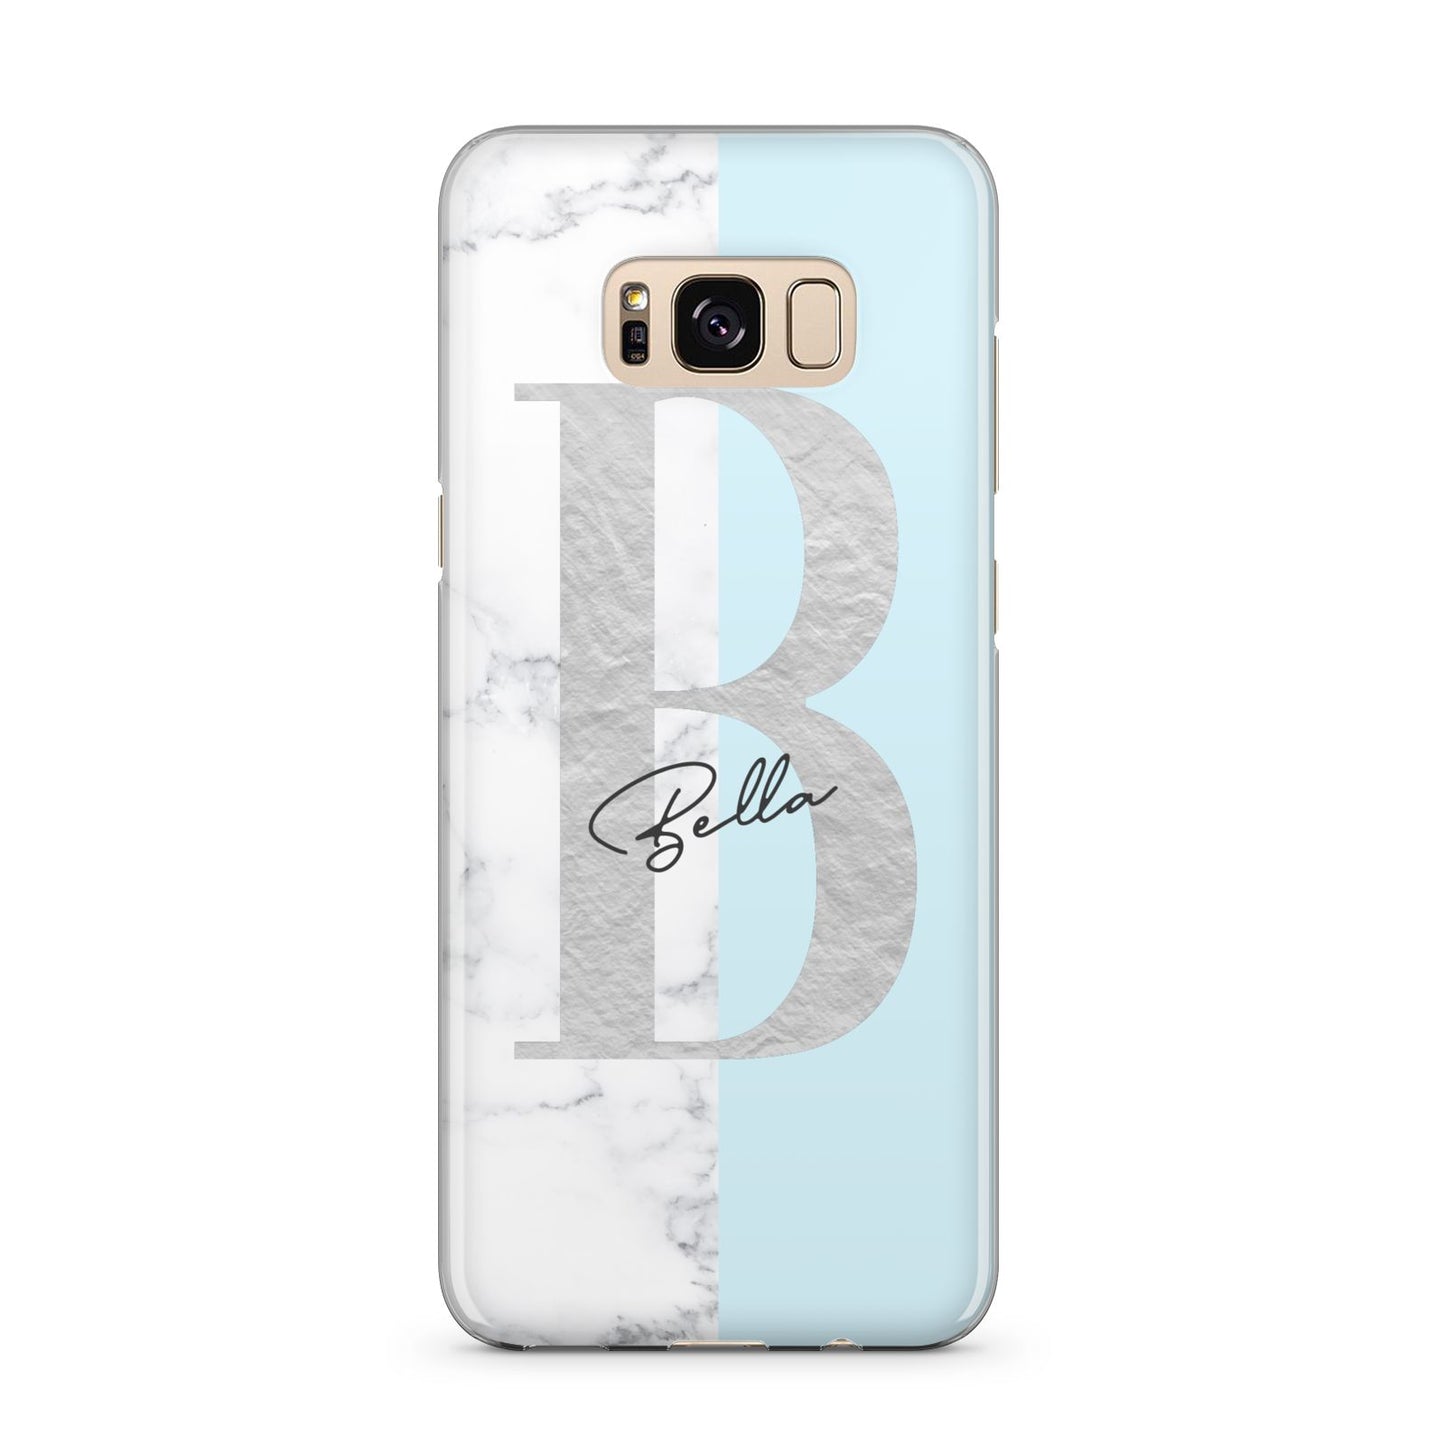 Personalised Chrome Marble Samsung Galaxy S8 Plus Case